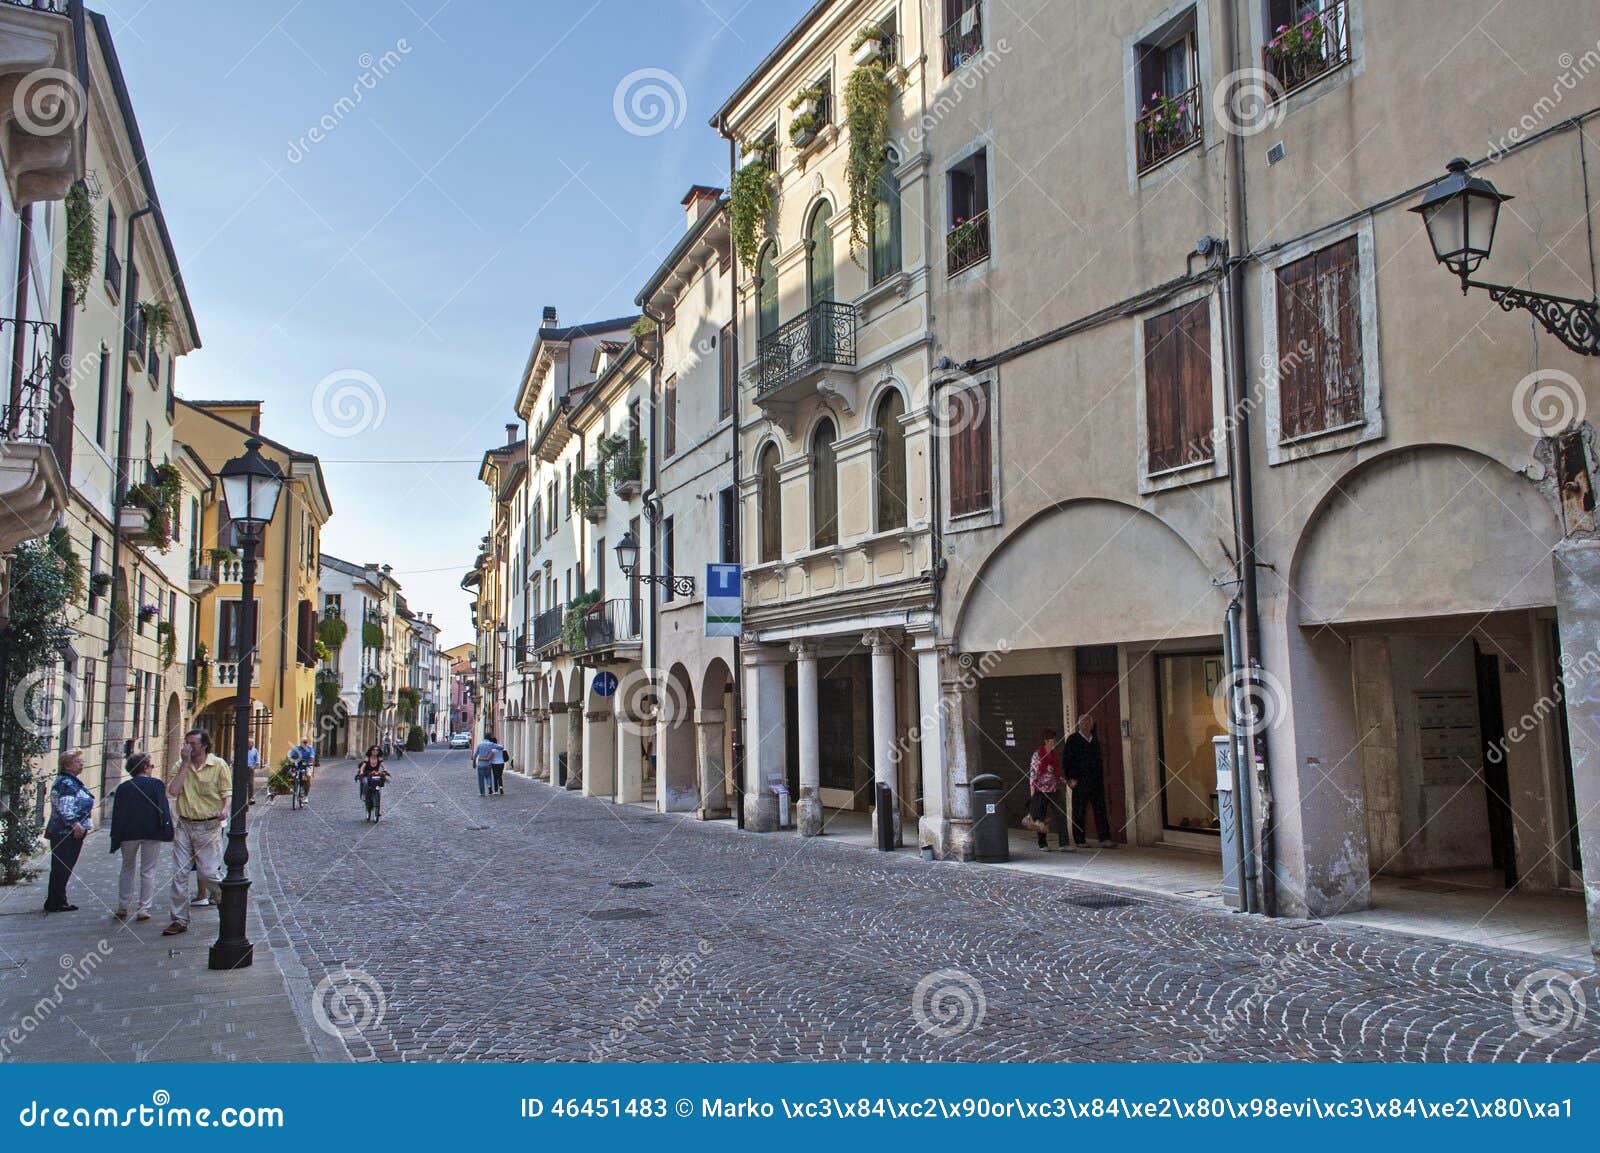 street of vicenza